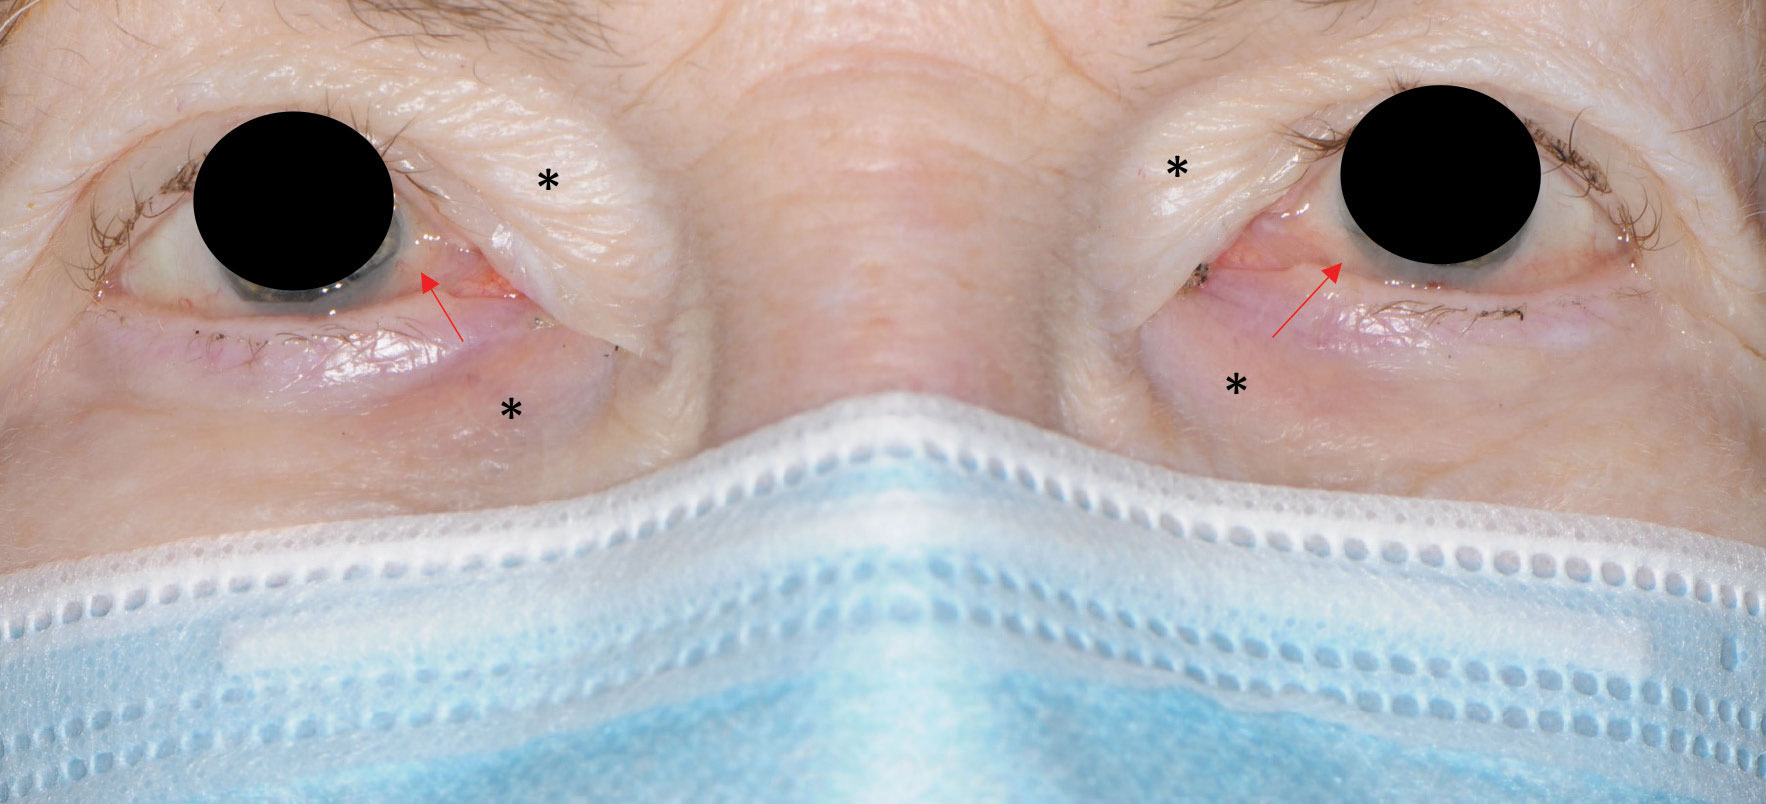 Fig. 5. Periorbital edema (black asterisks) and conjunctival chalasis (red arrows) in a patient on Gleevec.